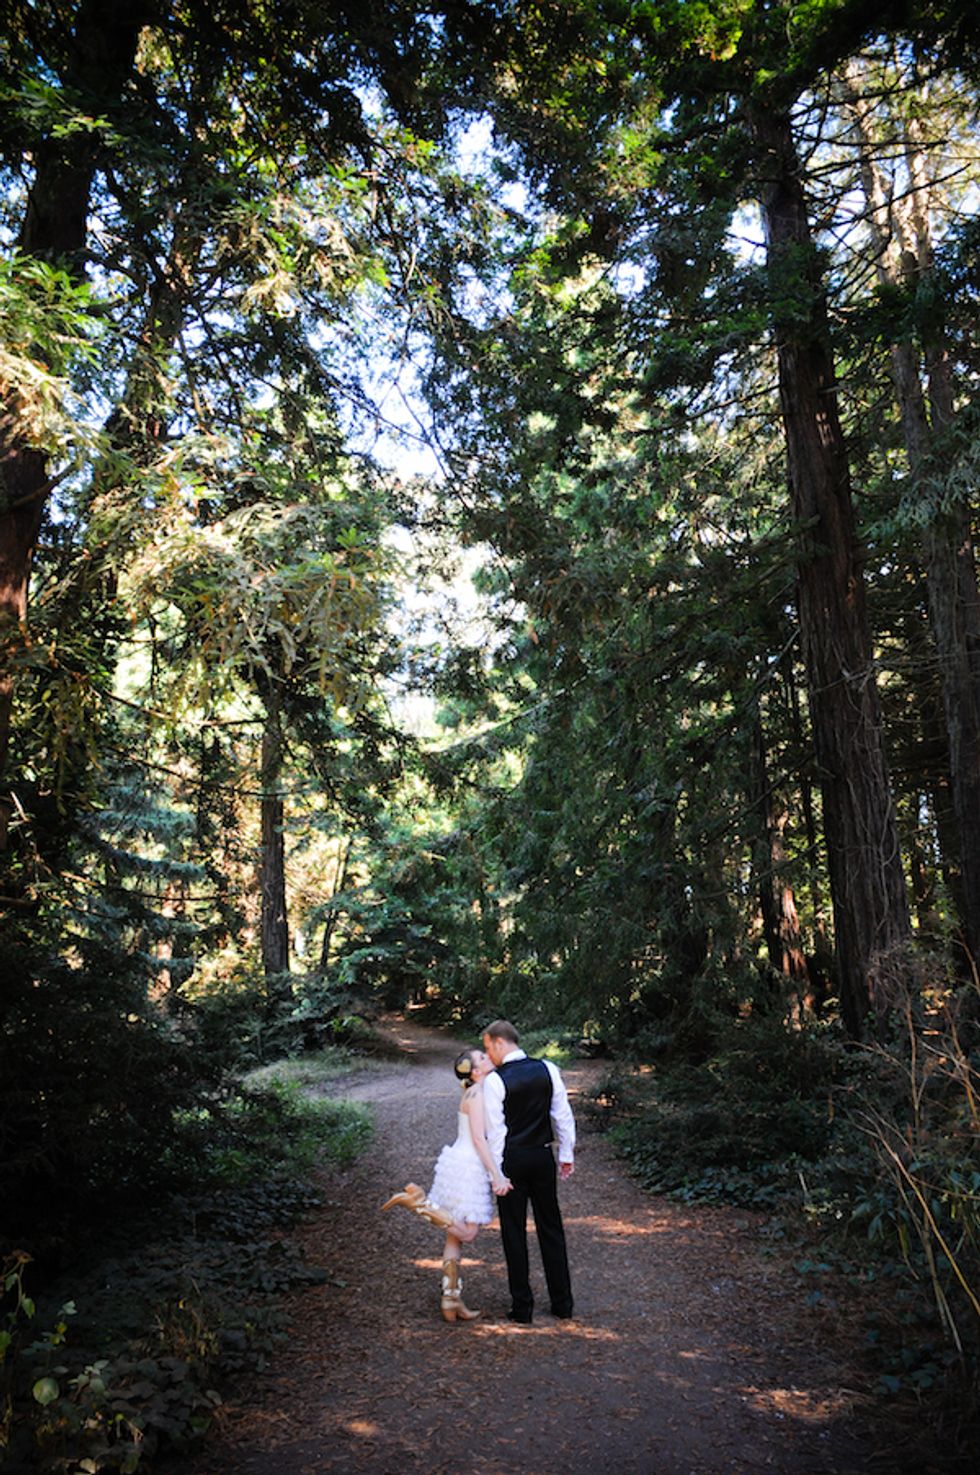 DIY Couple Gets Hitched In Golden Gate Park